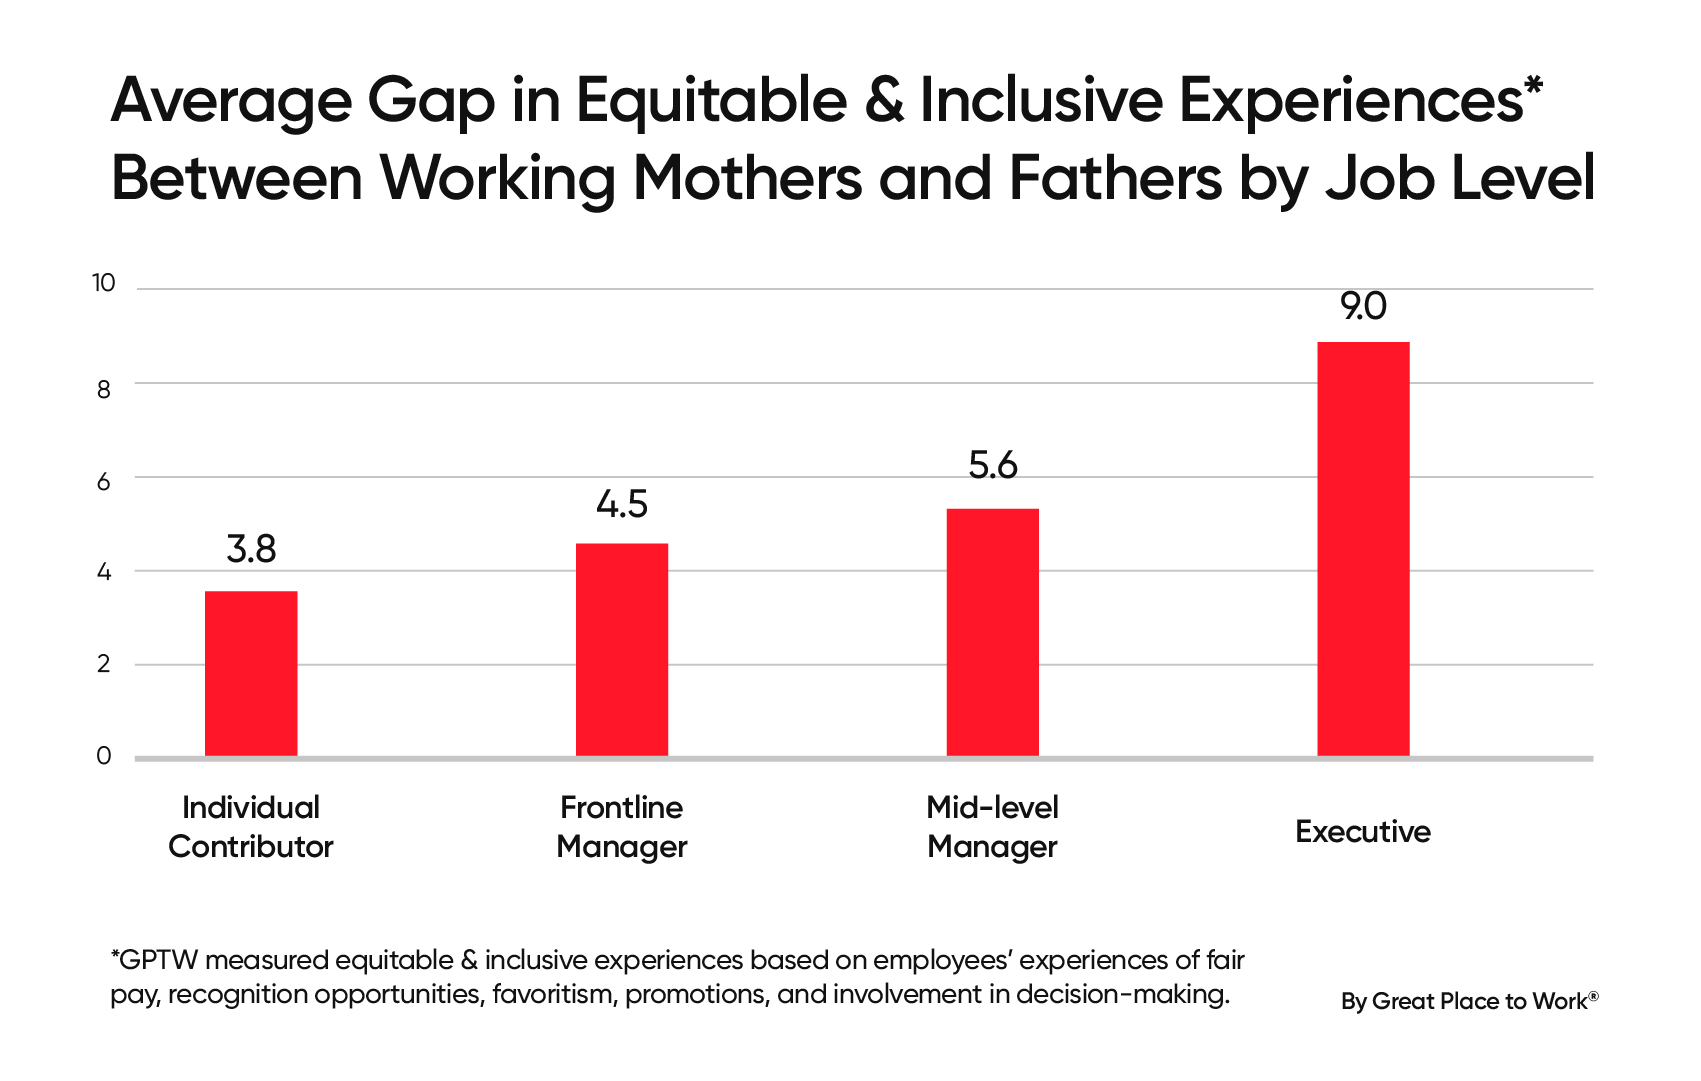 Average equity gap between working mothers and fathers by job level